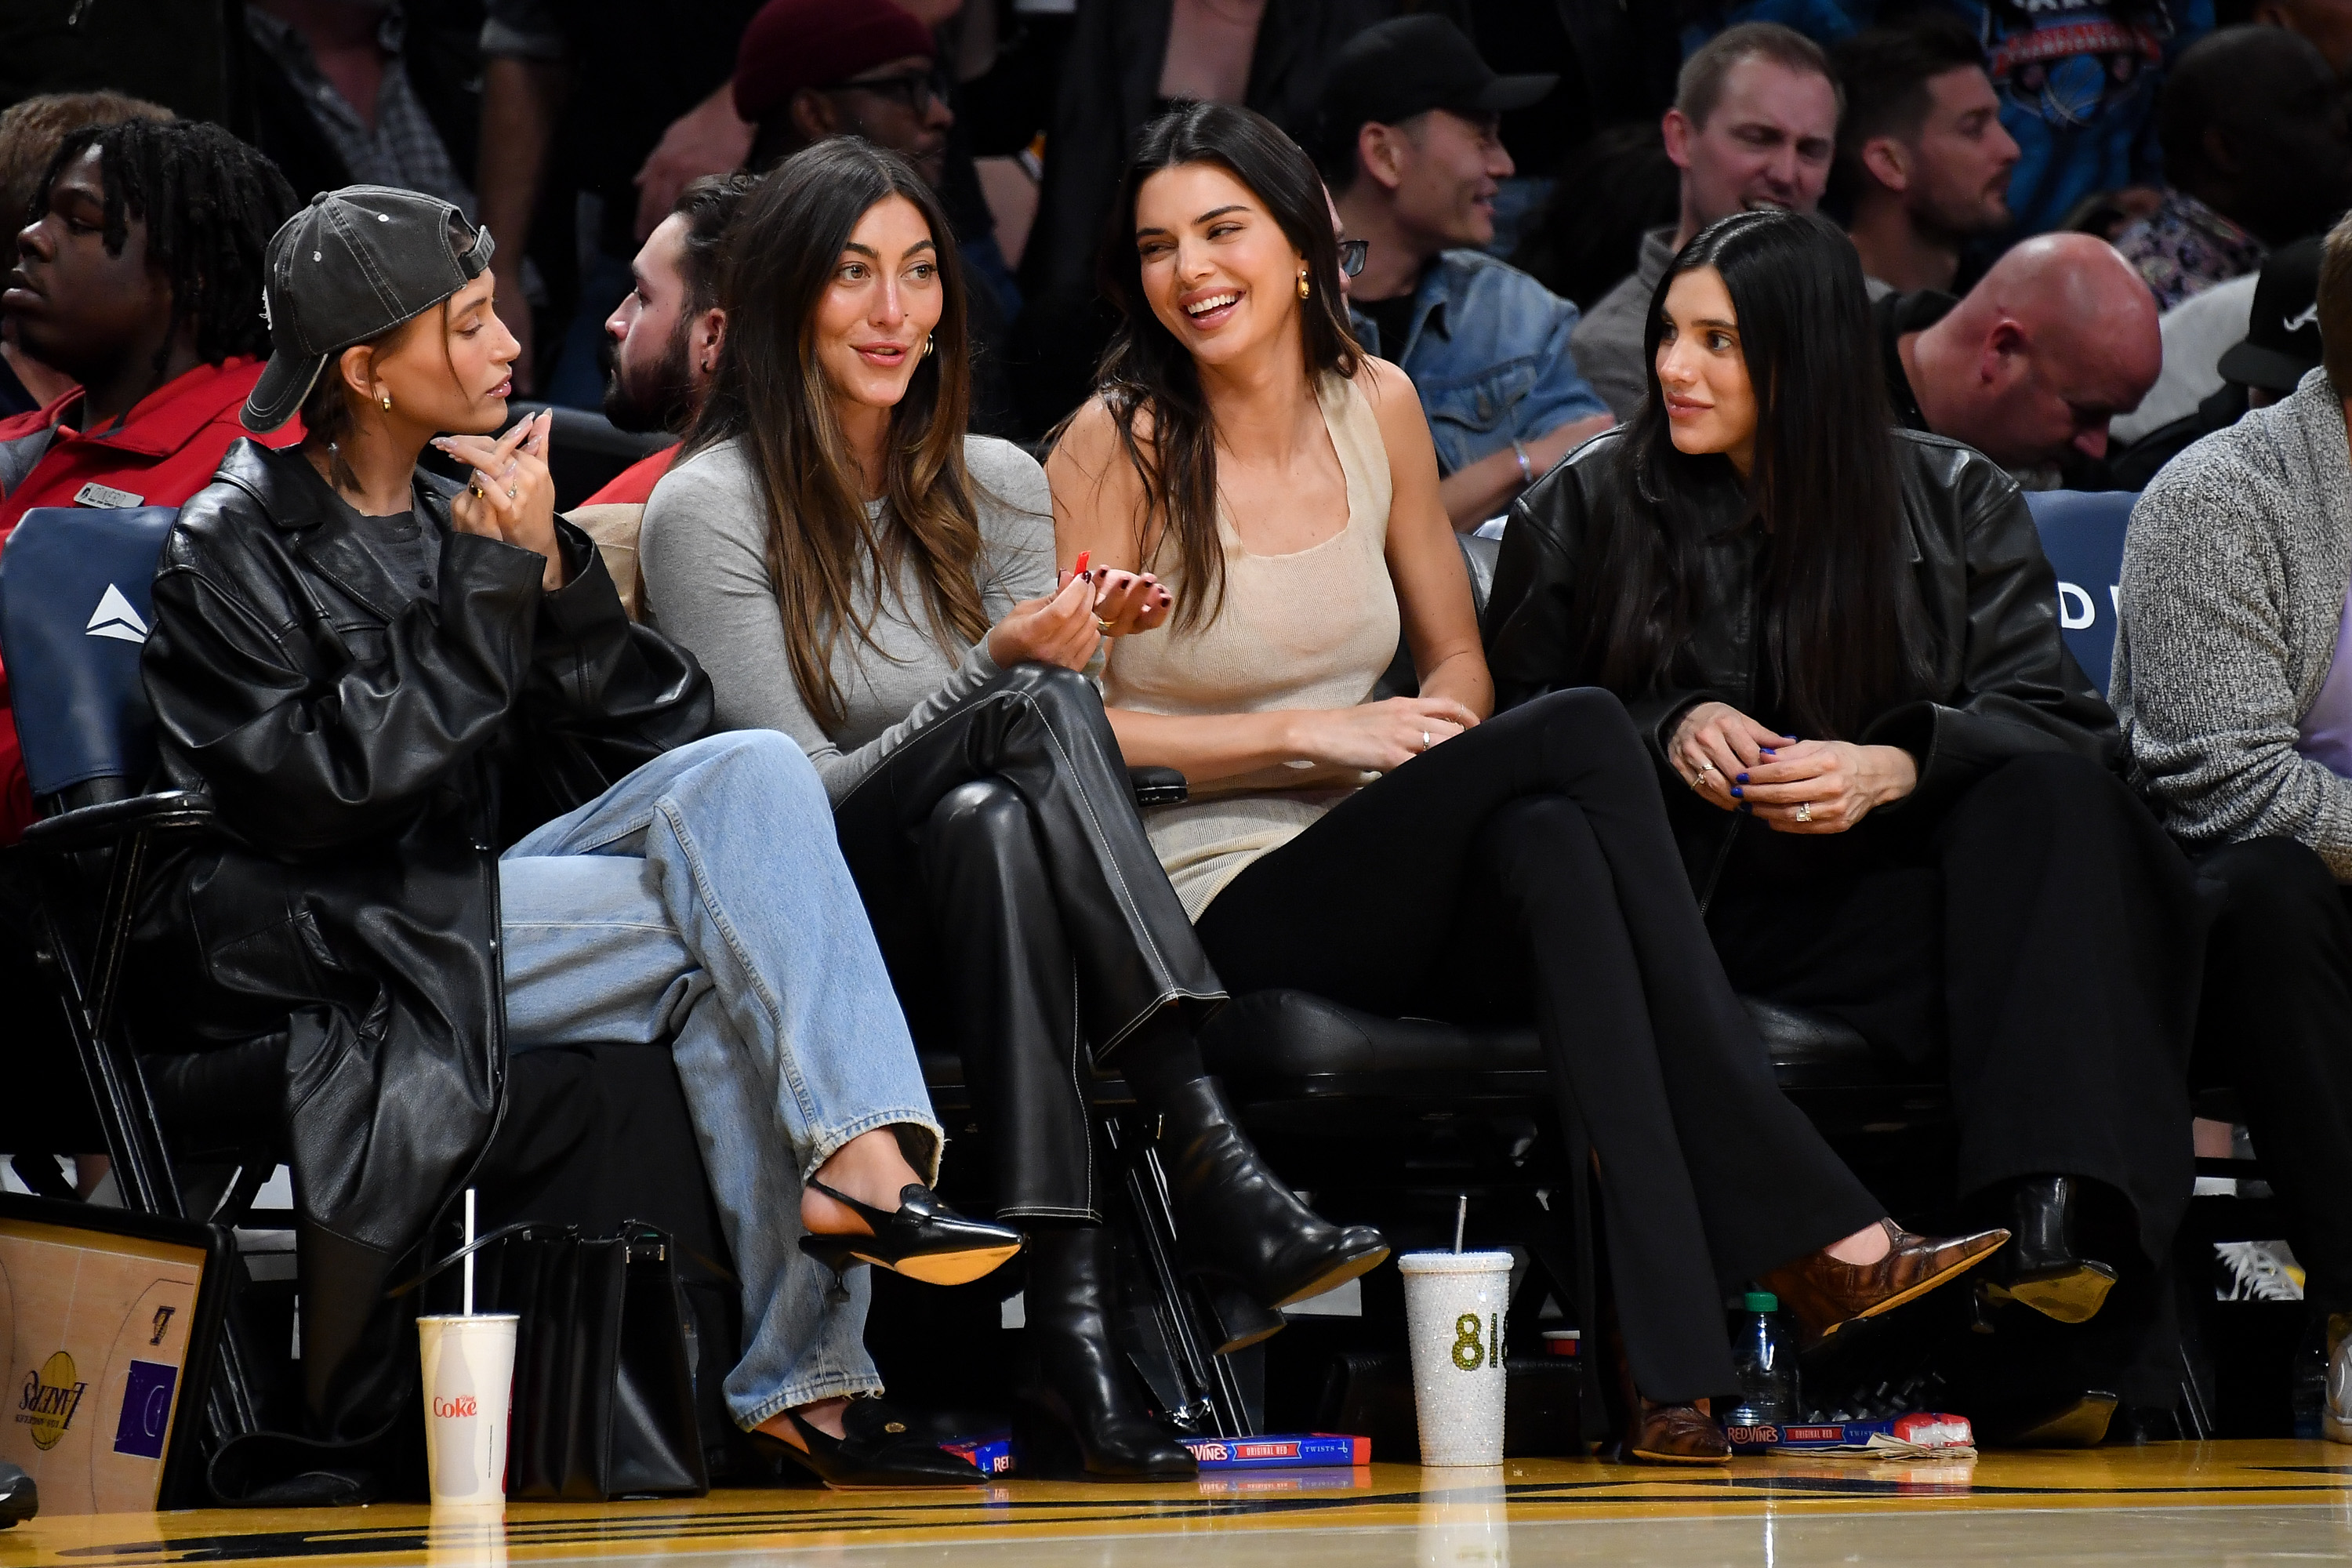 The model listened intently as her friends - including Kendall Jenner - laughed and chatted